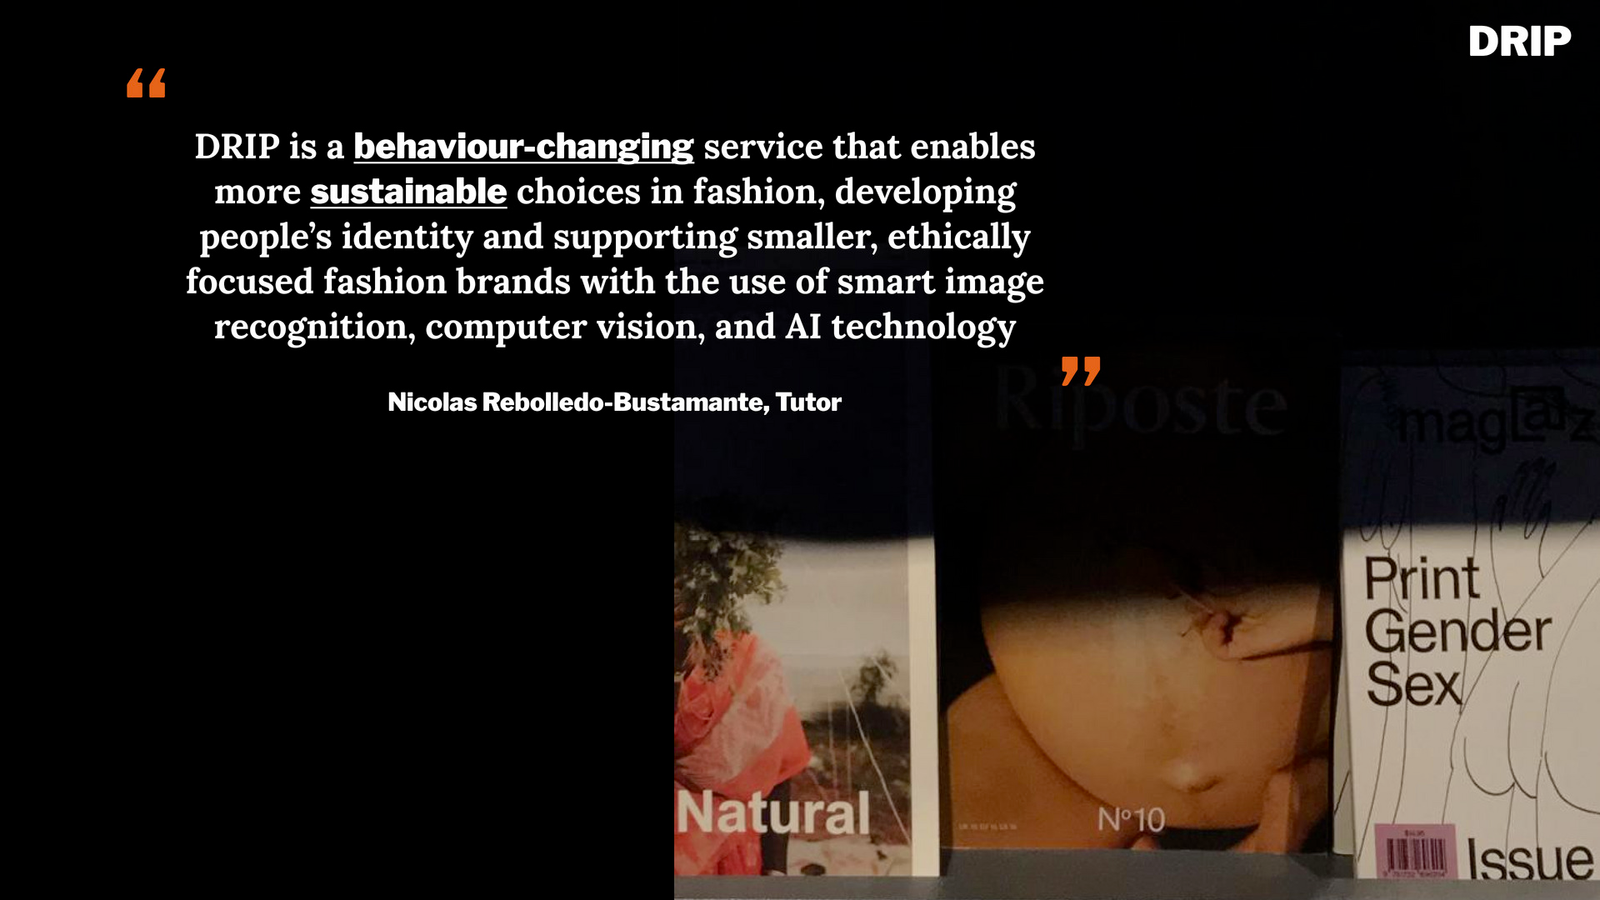 enables more sustainable choices in fashion,developing people’s identity and supporting smaller,ethically focused fashion brands